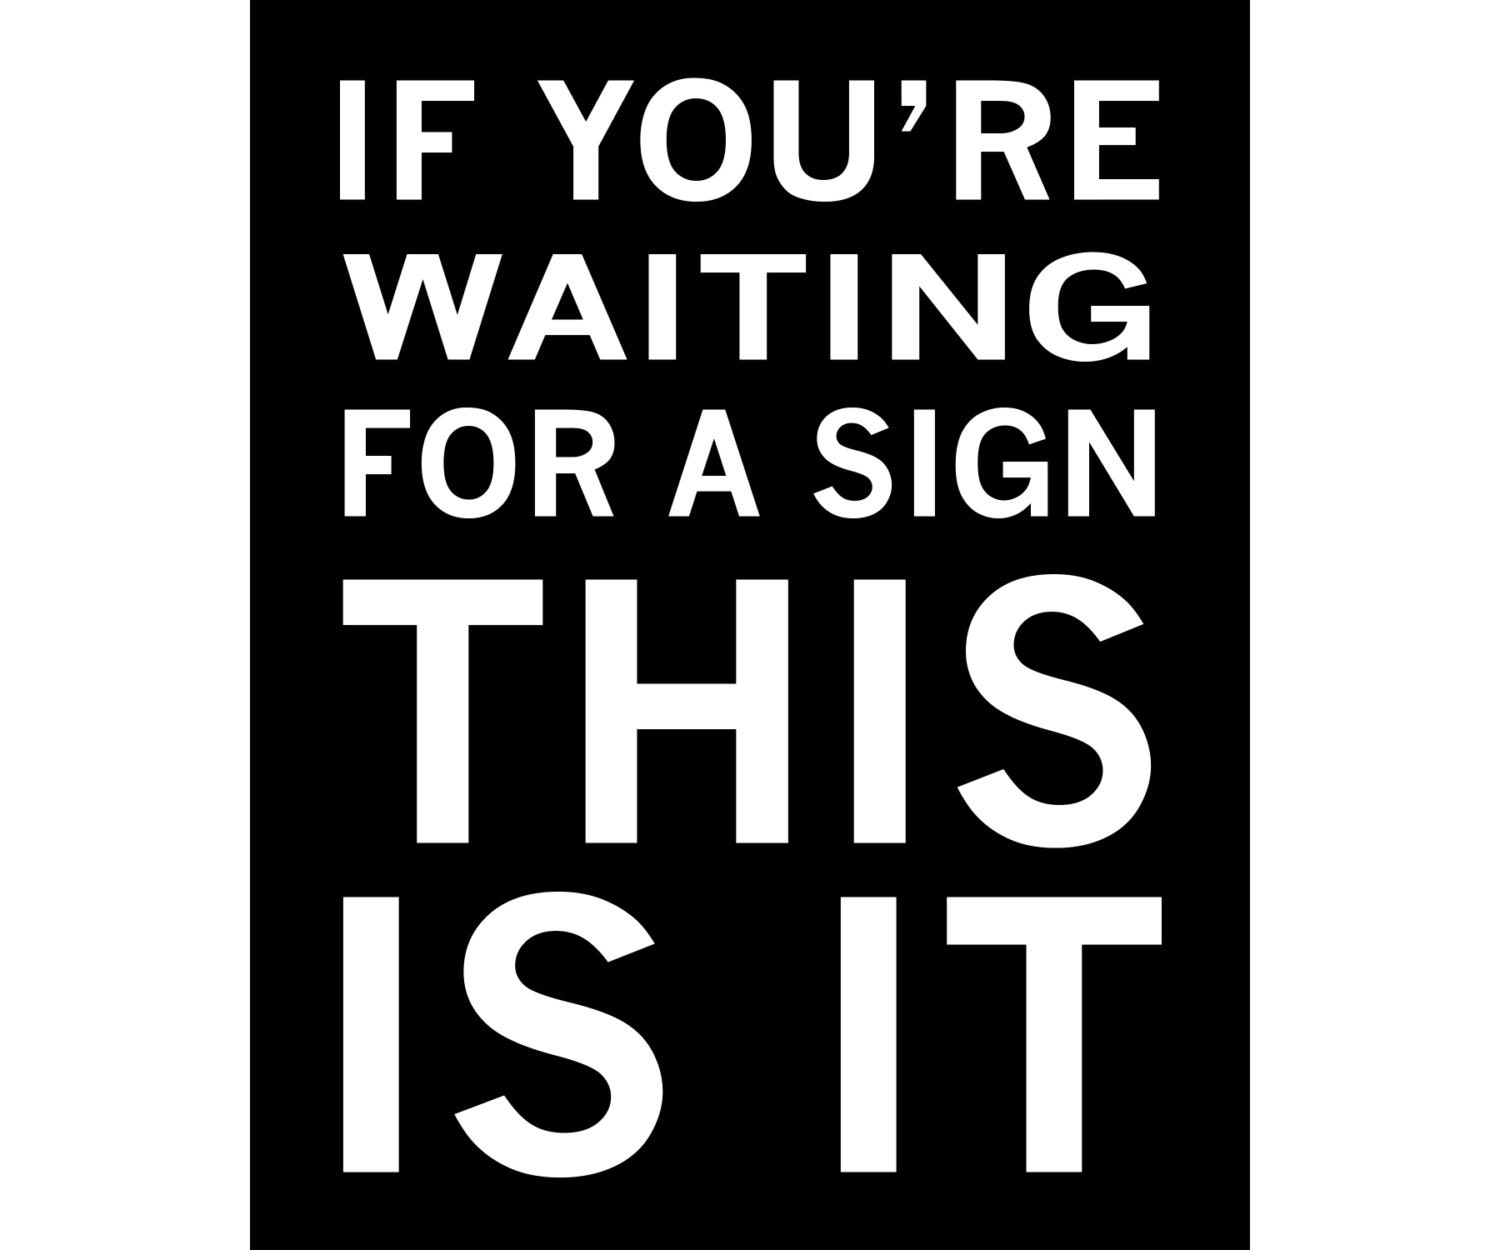 If you are waiting for a sign this is it Available Sizes